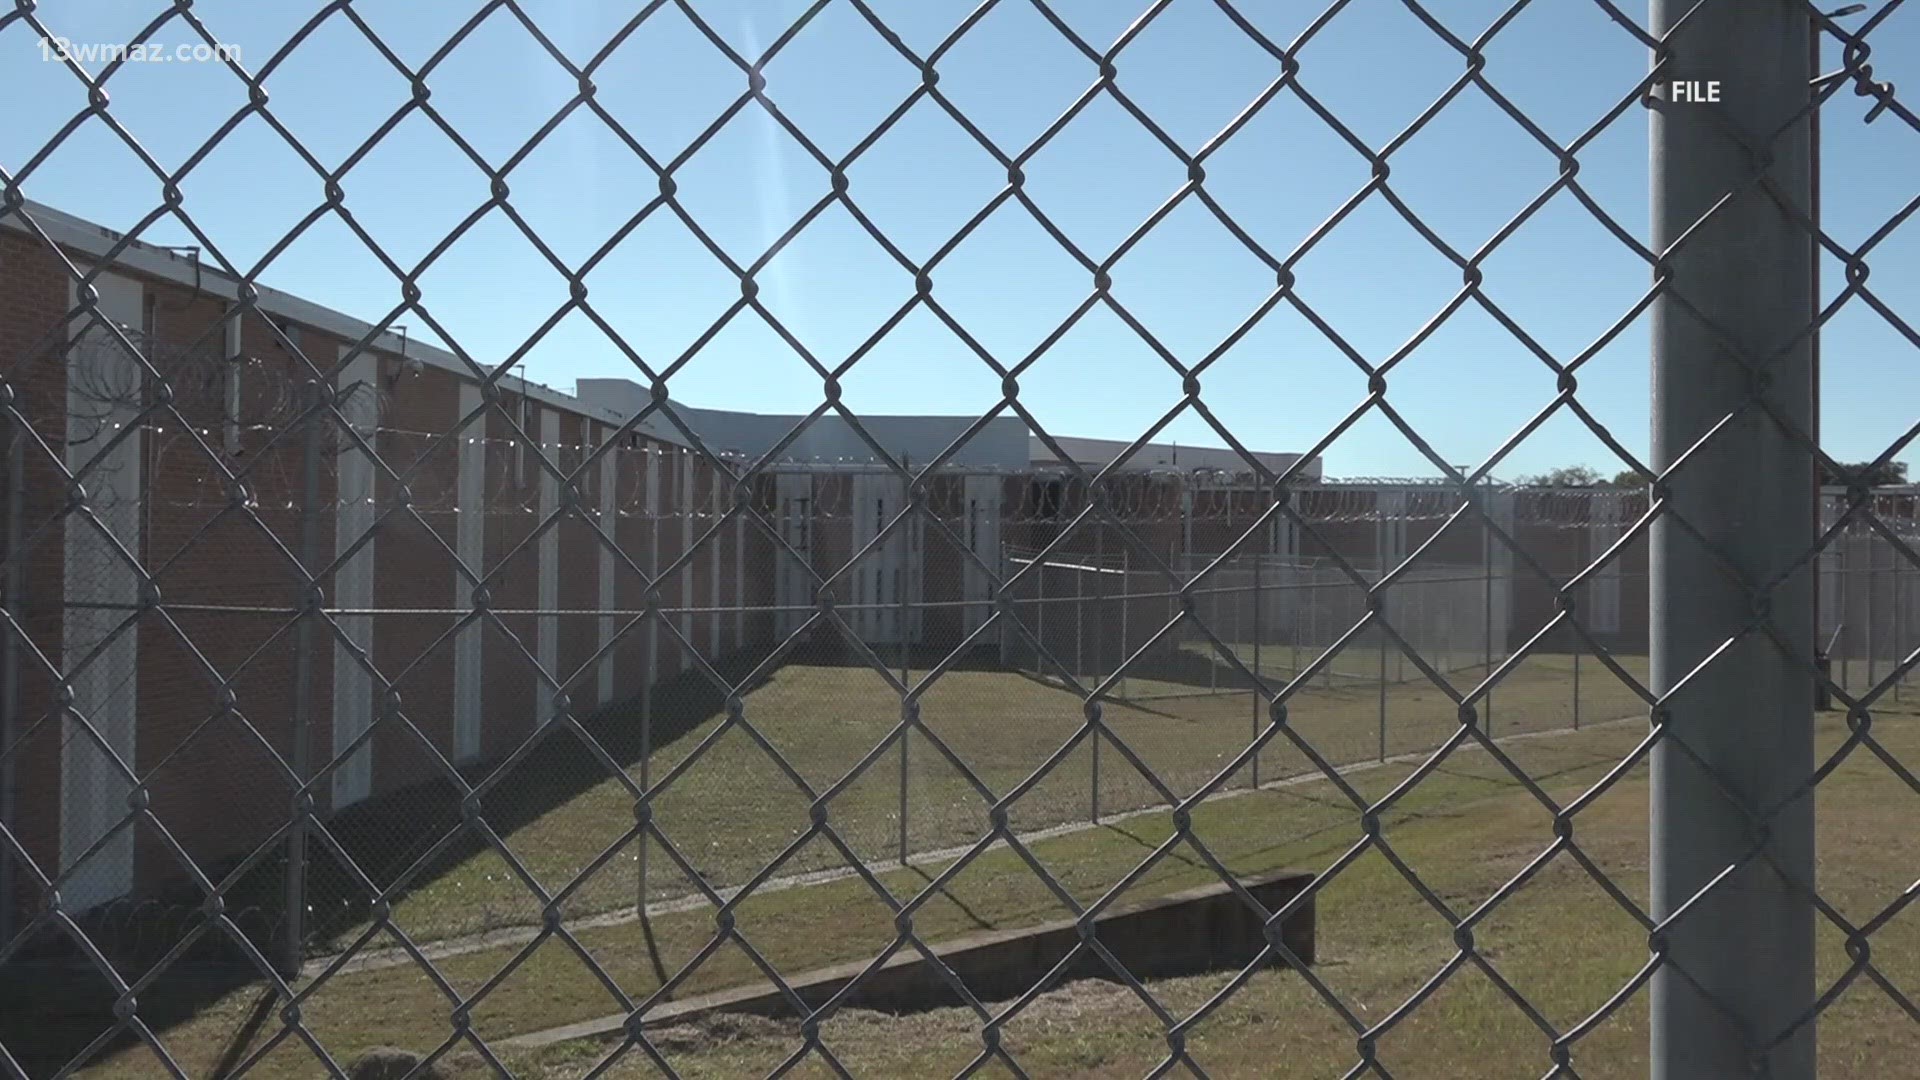 Inmate tried to climb over fence during prison escape